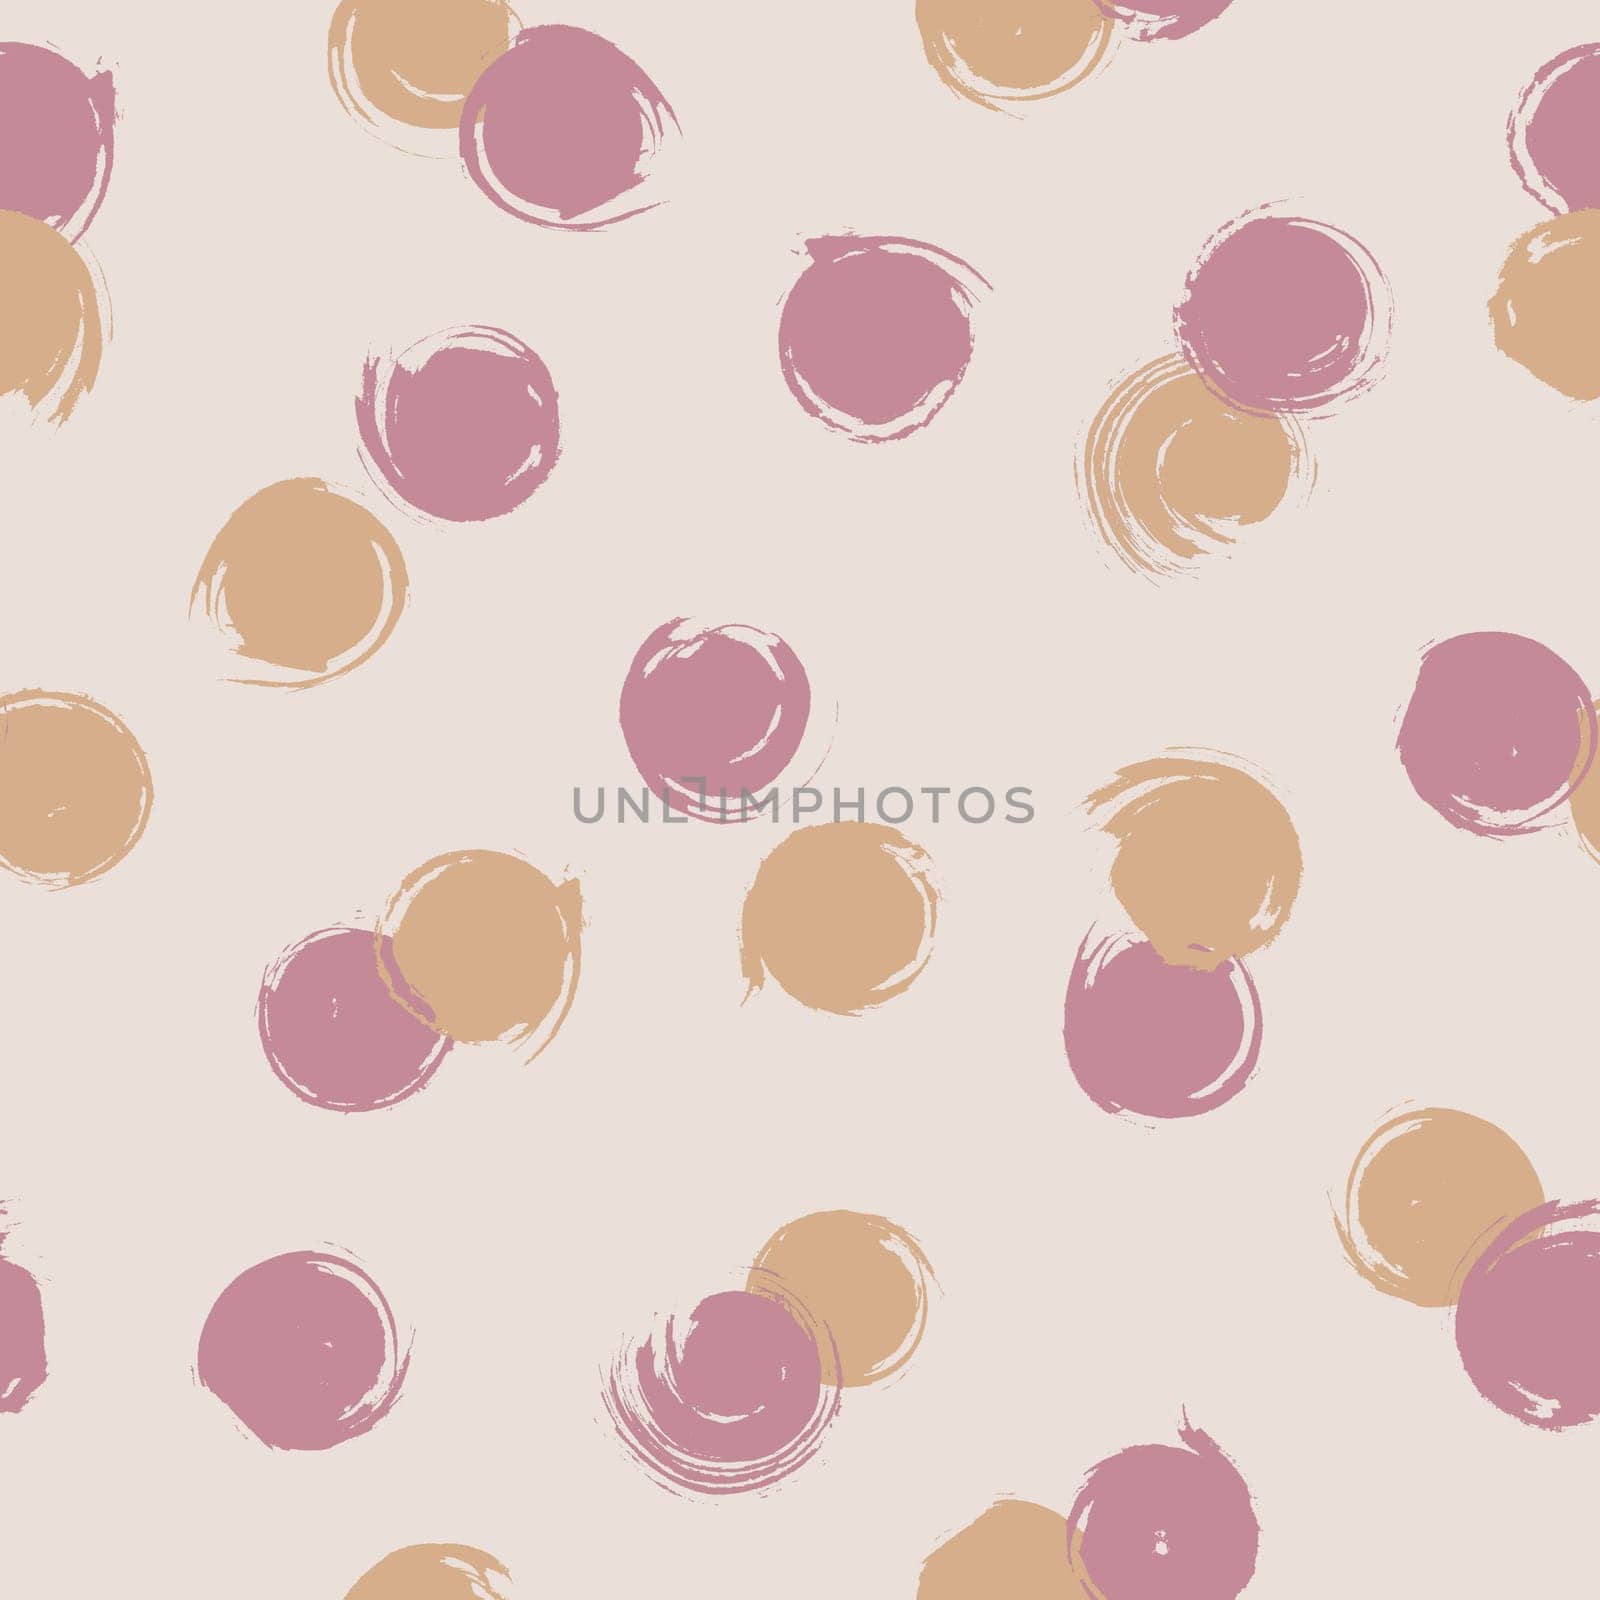 Seamless print with hand drawn polka dots on beige background. Trendy fabric print.